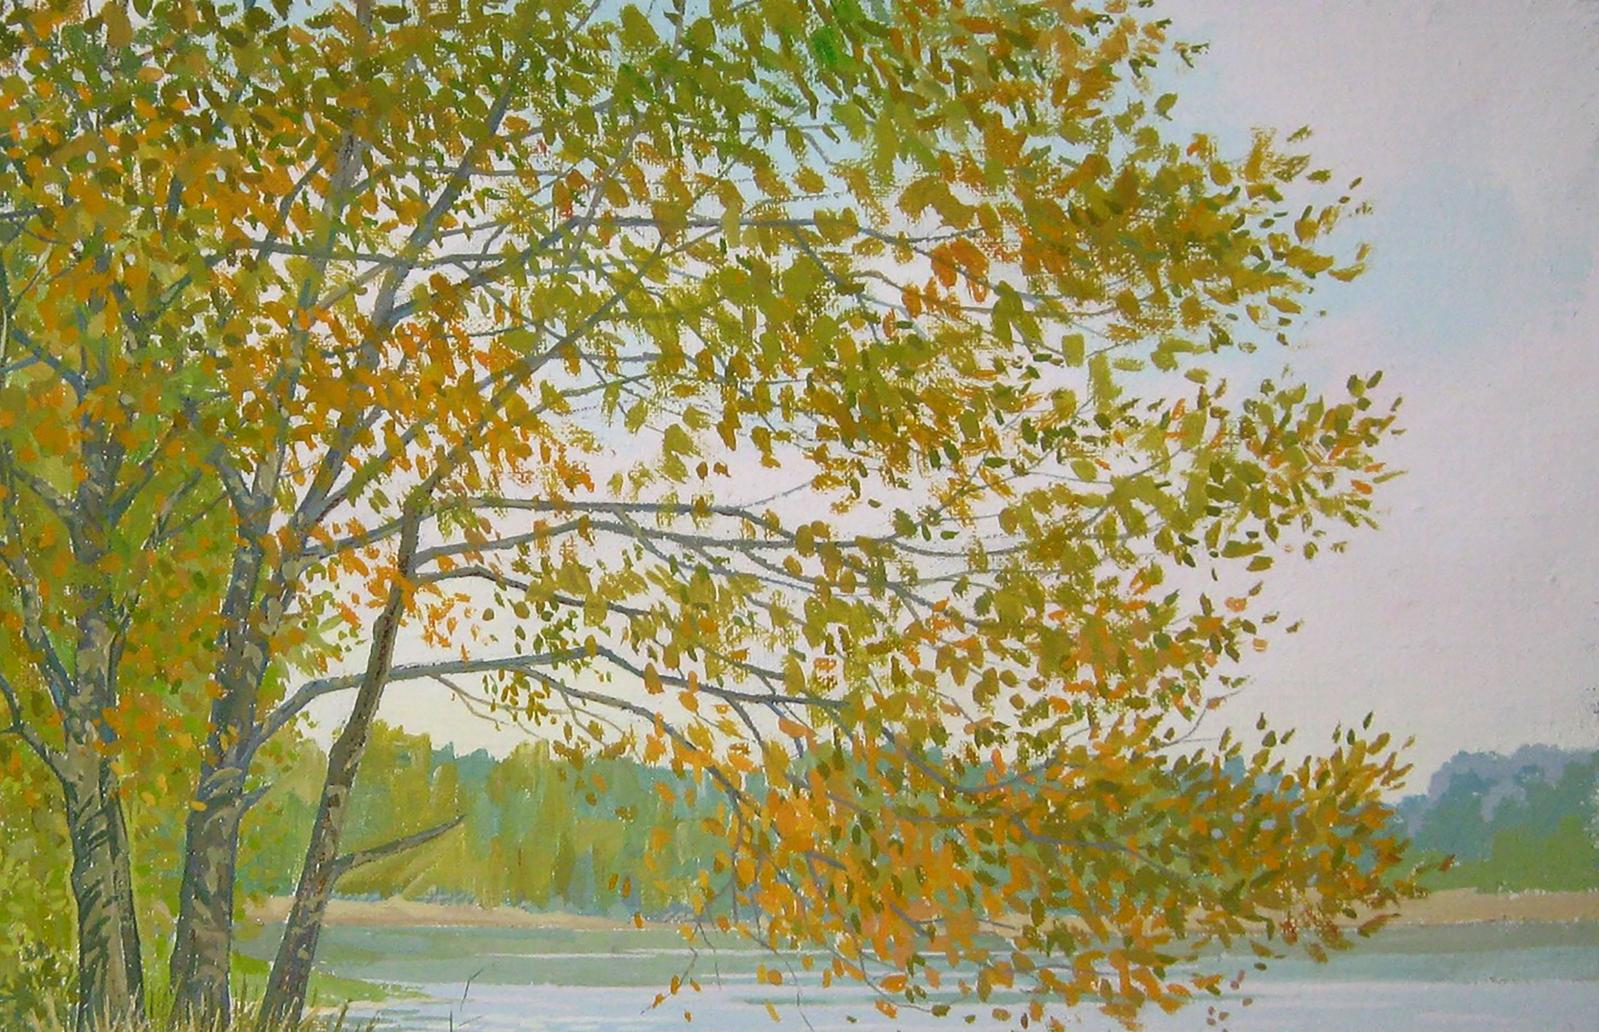 Valery Savenets' acrylic painting titled "October in Teterev Region."